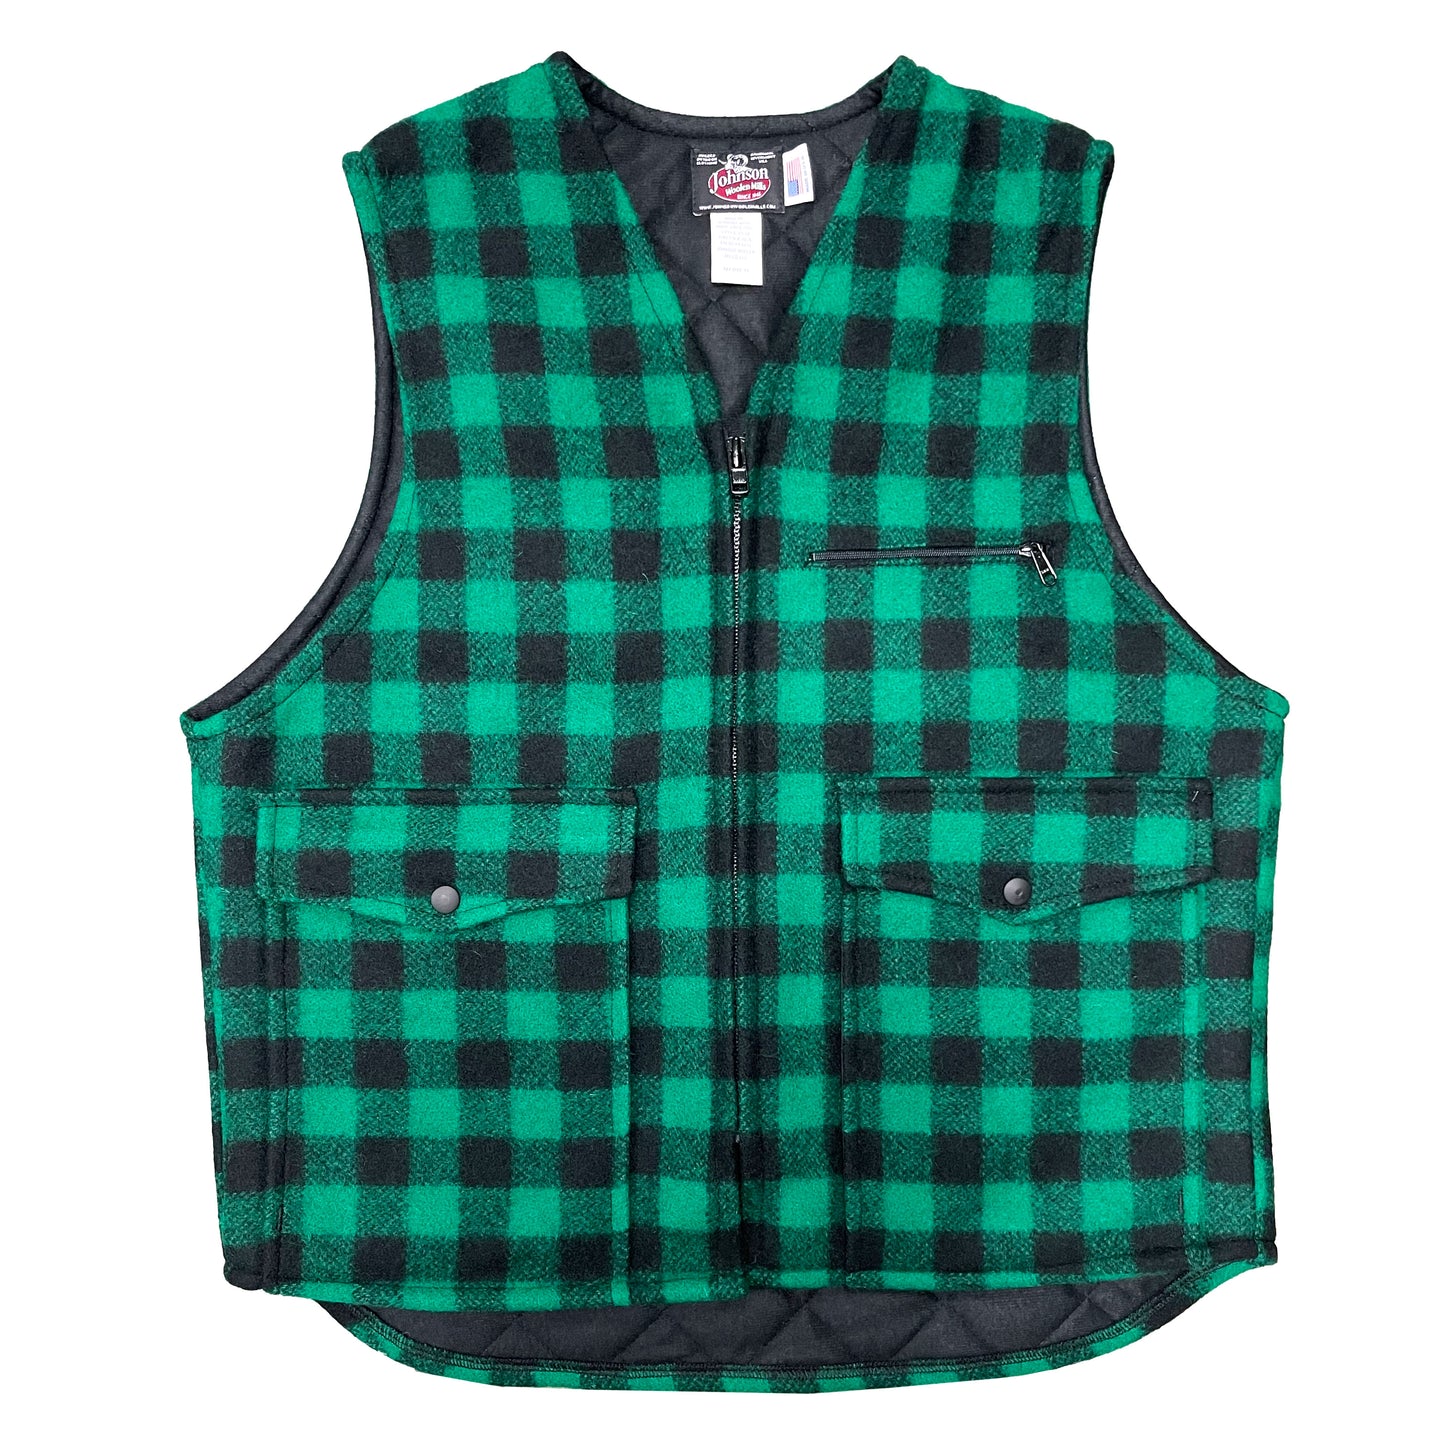 Vest with tricot lining, green & black 1 inch buffalo squares, zipper front, two large pockets and chest pocket, front view